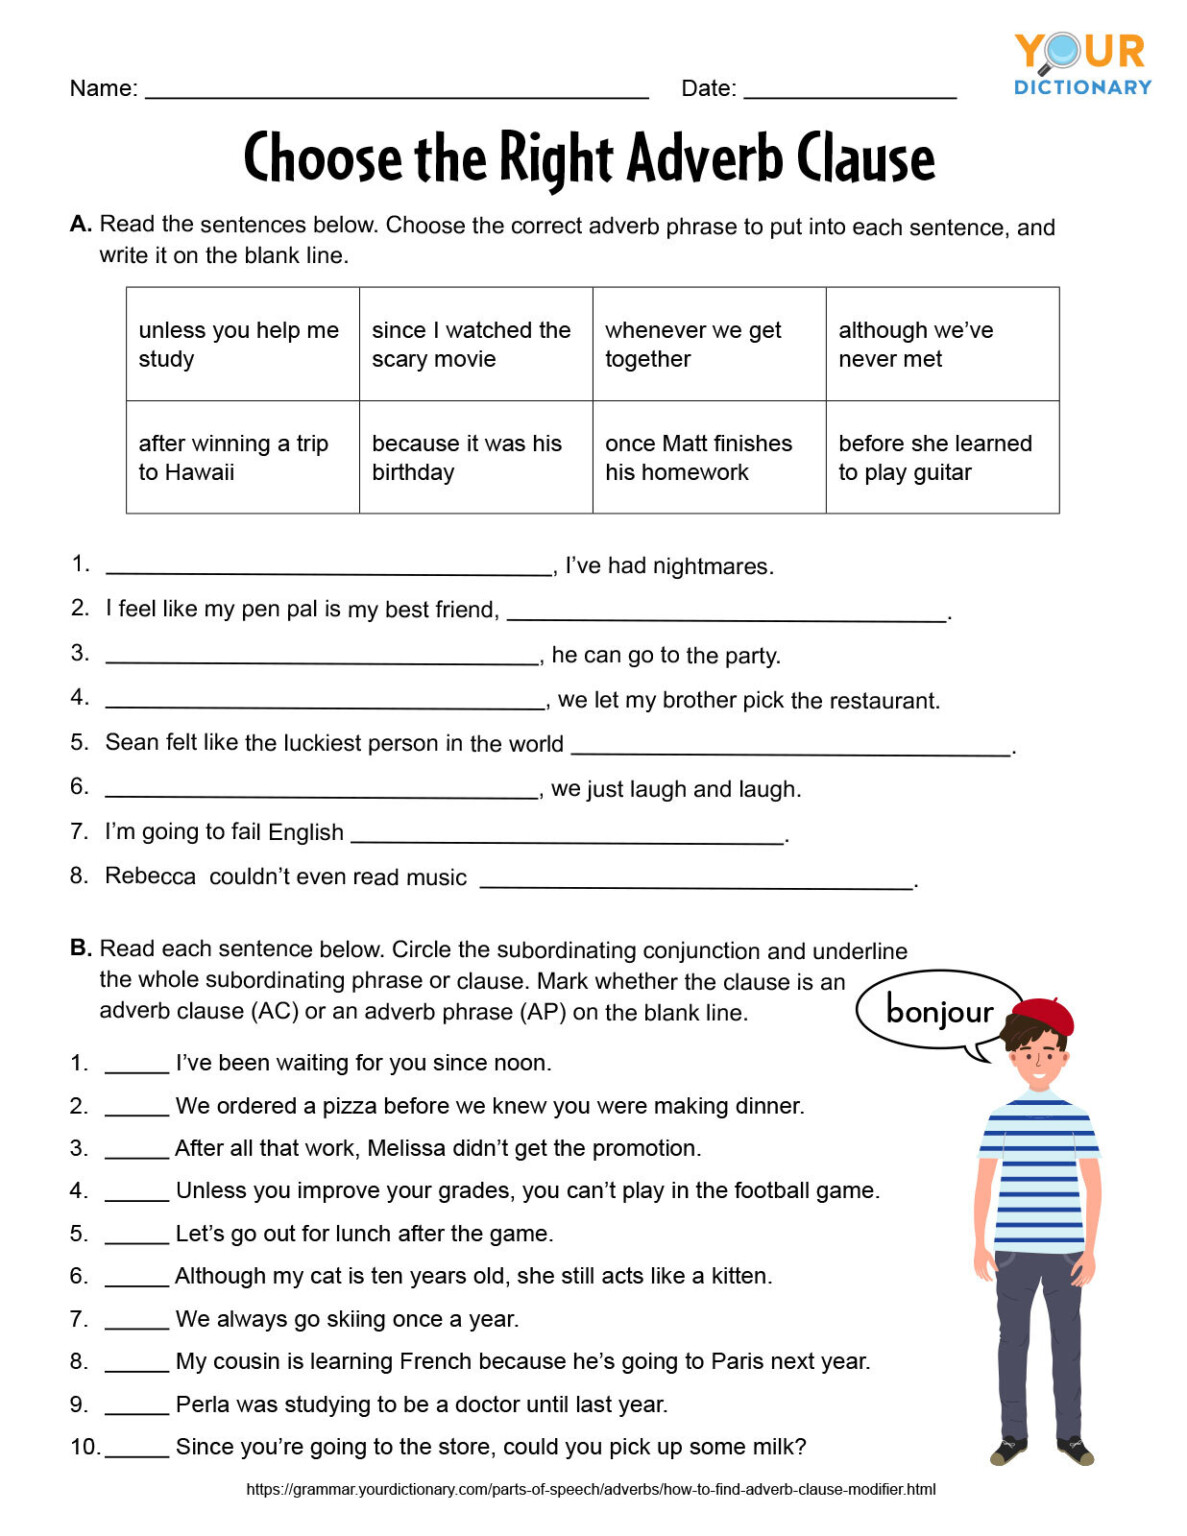 noun-adverb-adjective-clauses-exercise-adverbworksheets